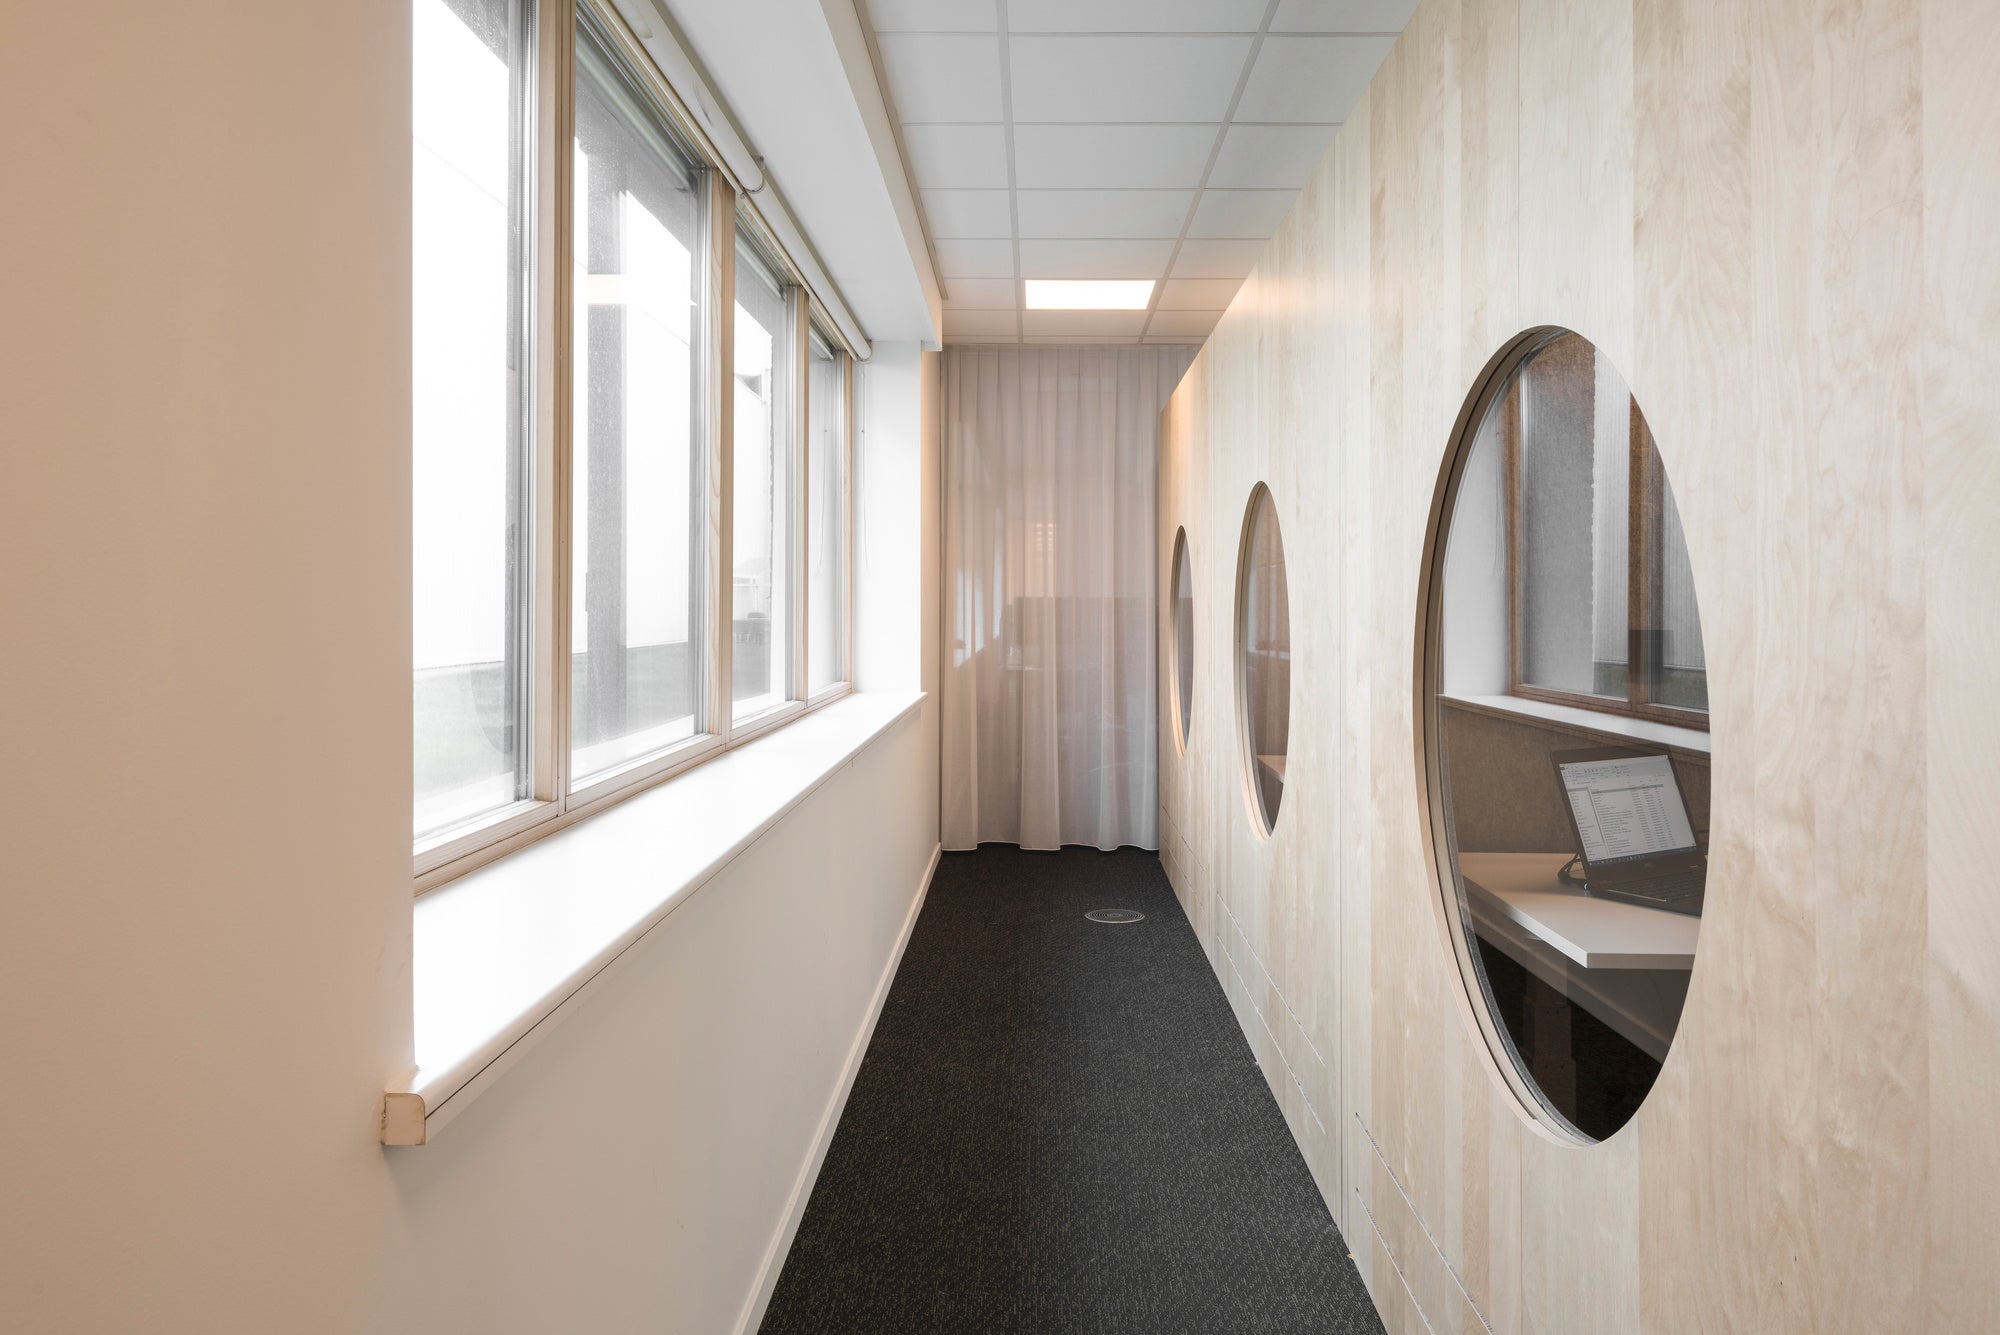 volvo trucks ghent - volvo trucks office - pods - office pods - bright wood wall - bright wood panels